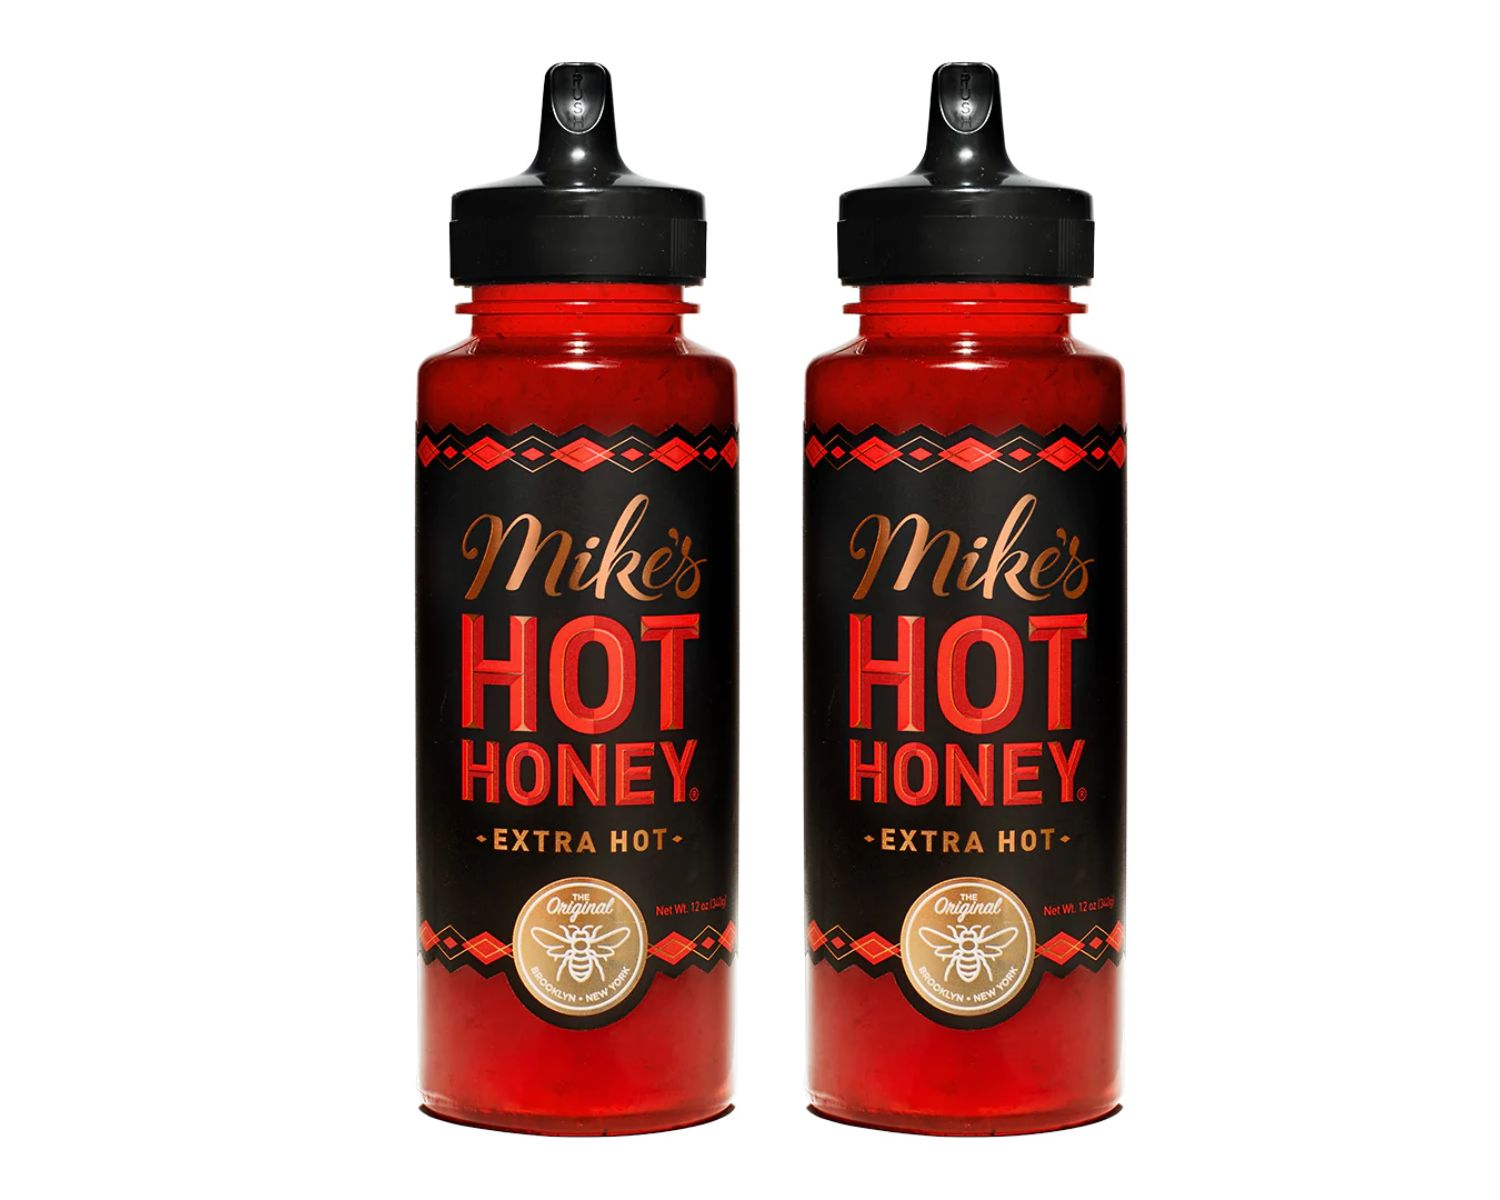 20-mikes-hot-honey-nutrition-facts